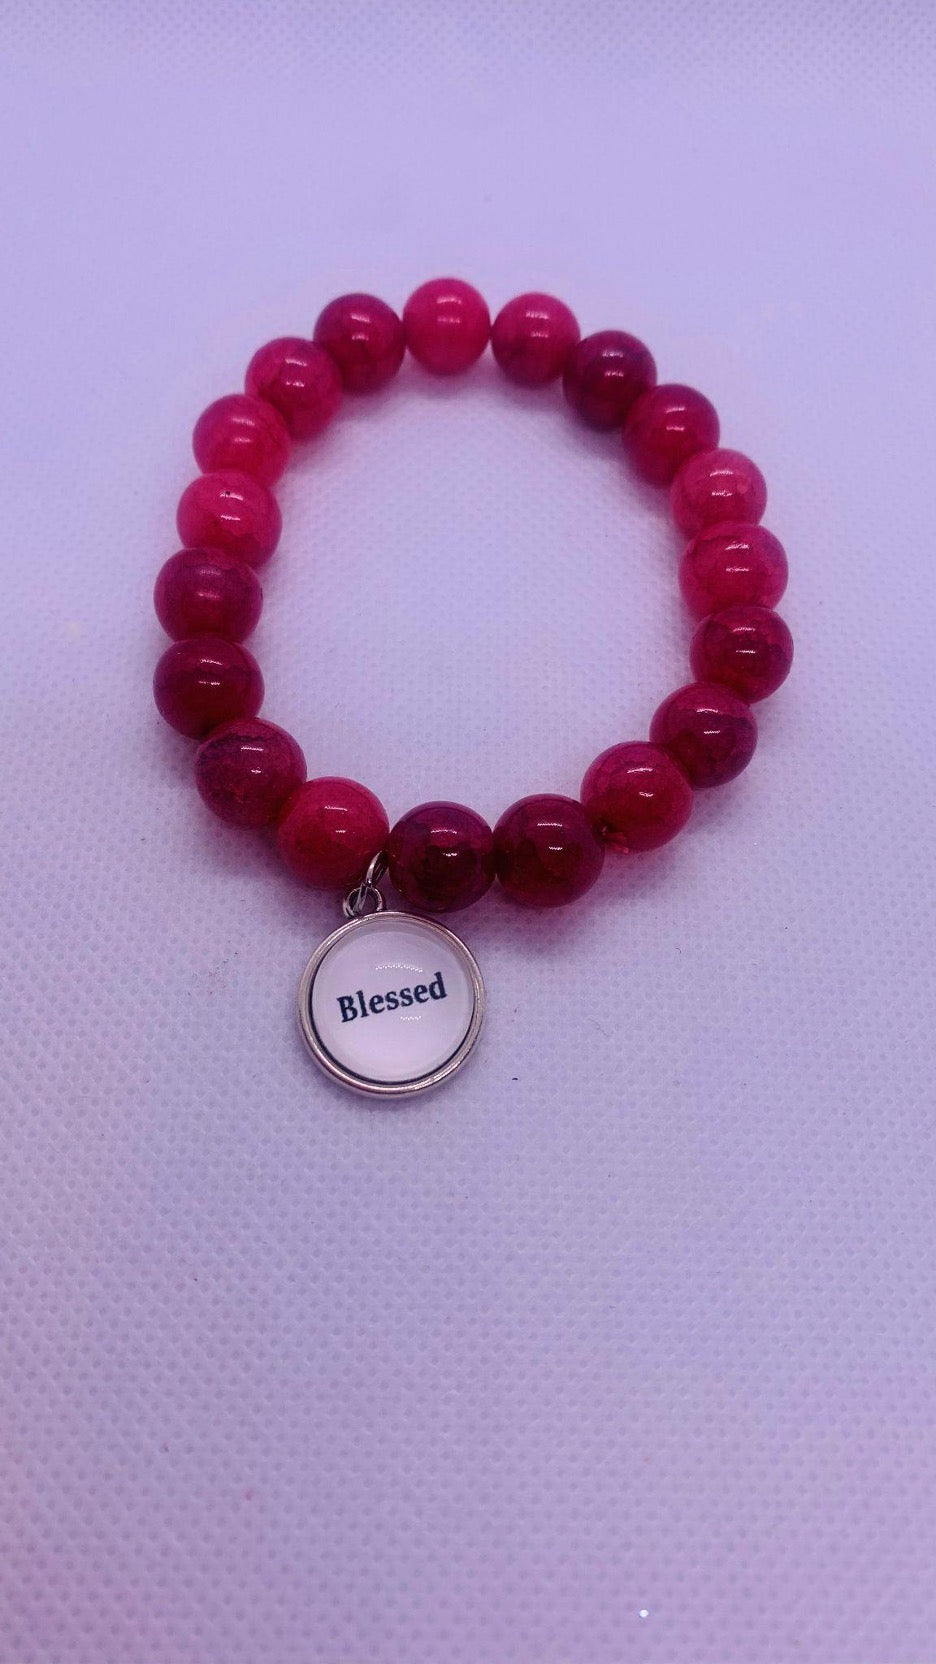 “Blessed” Charm Glass Bracelet - Cowtown Bling N Things